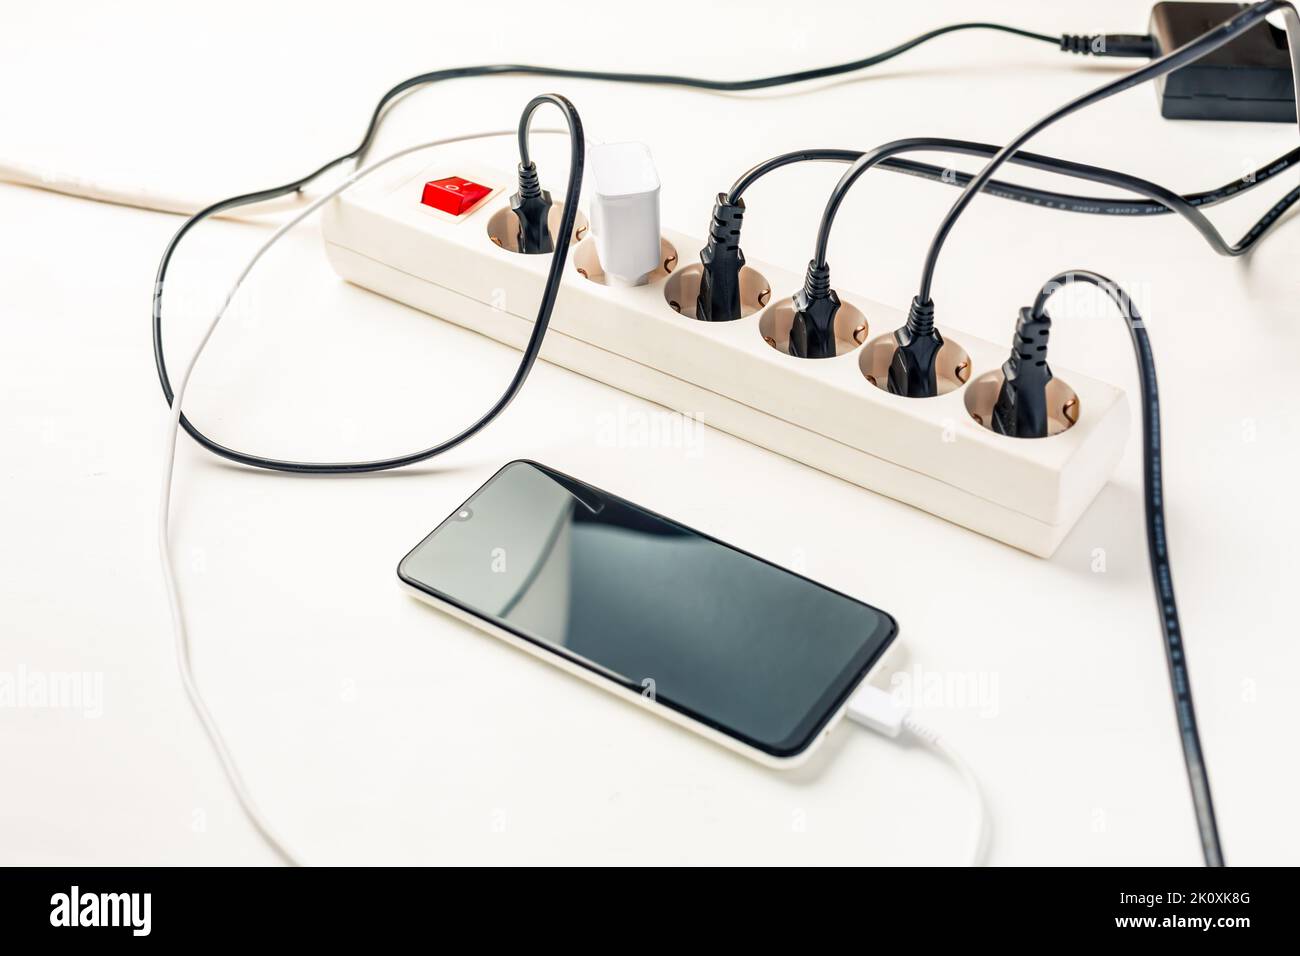 Many chargers plugged into multiple socket. Concept of overloading and energy costs Stock Photo